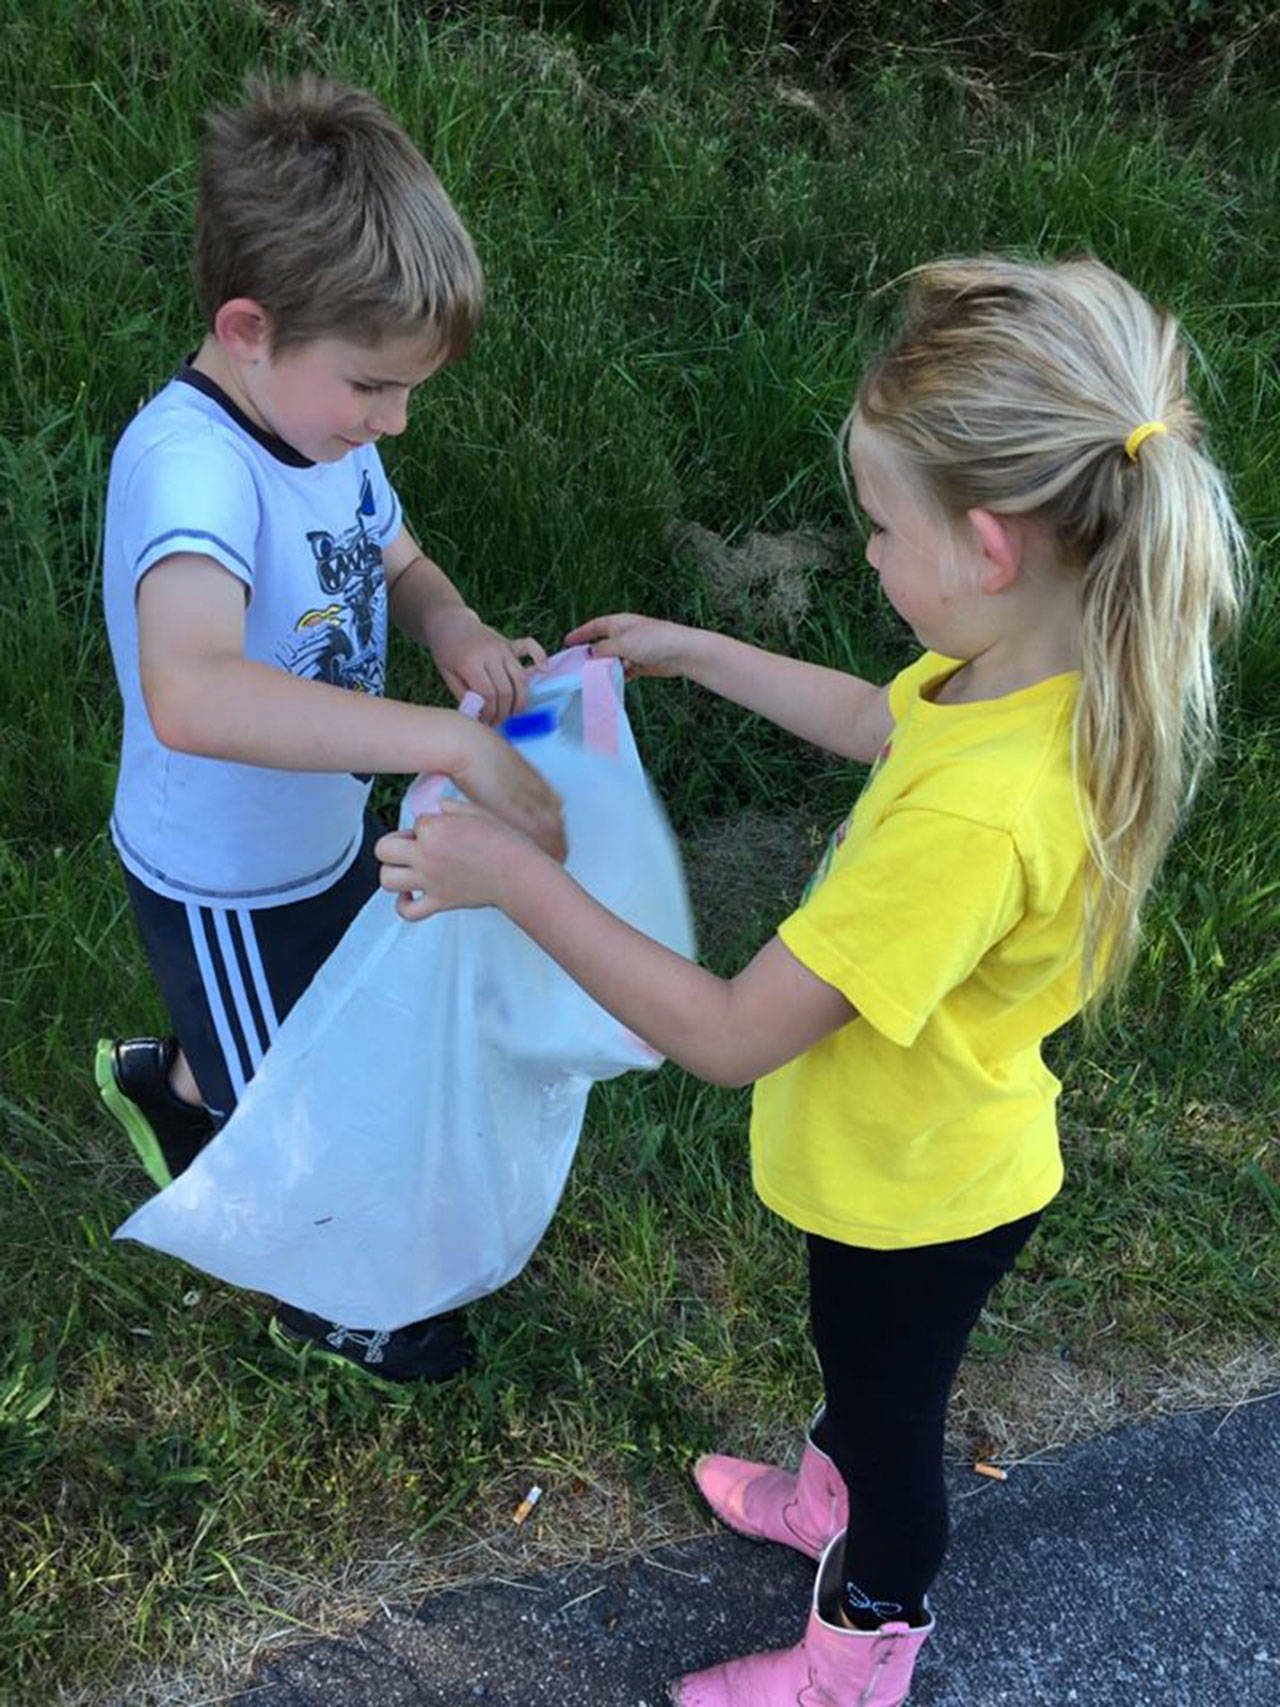 Proof that folks don’t need a sign to adopt and clean a roadway. While out for a stroll June 12 in Oak Harbor, Jack and Hyley Farrell decided they were tired of their town looking dirty and started picking up litter. Photo by Holly Peters Farrell